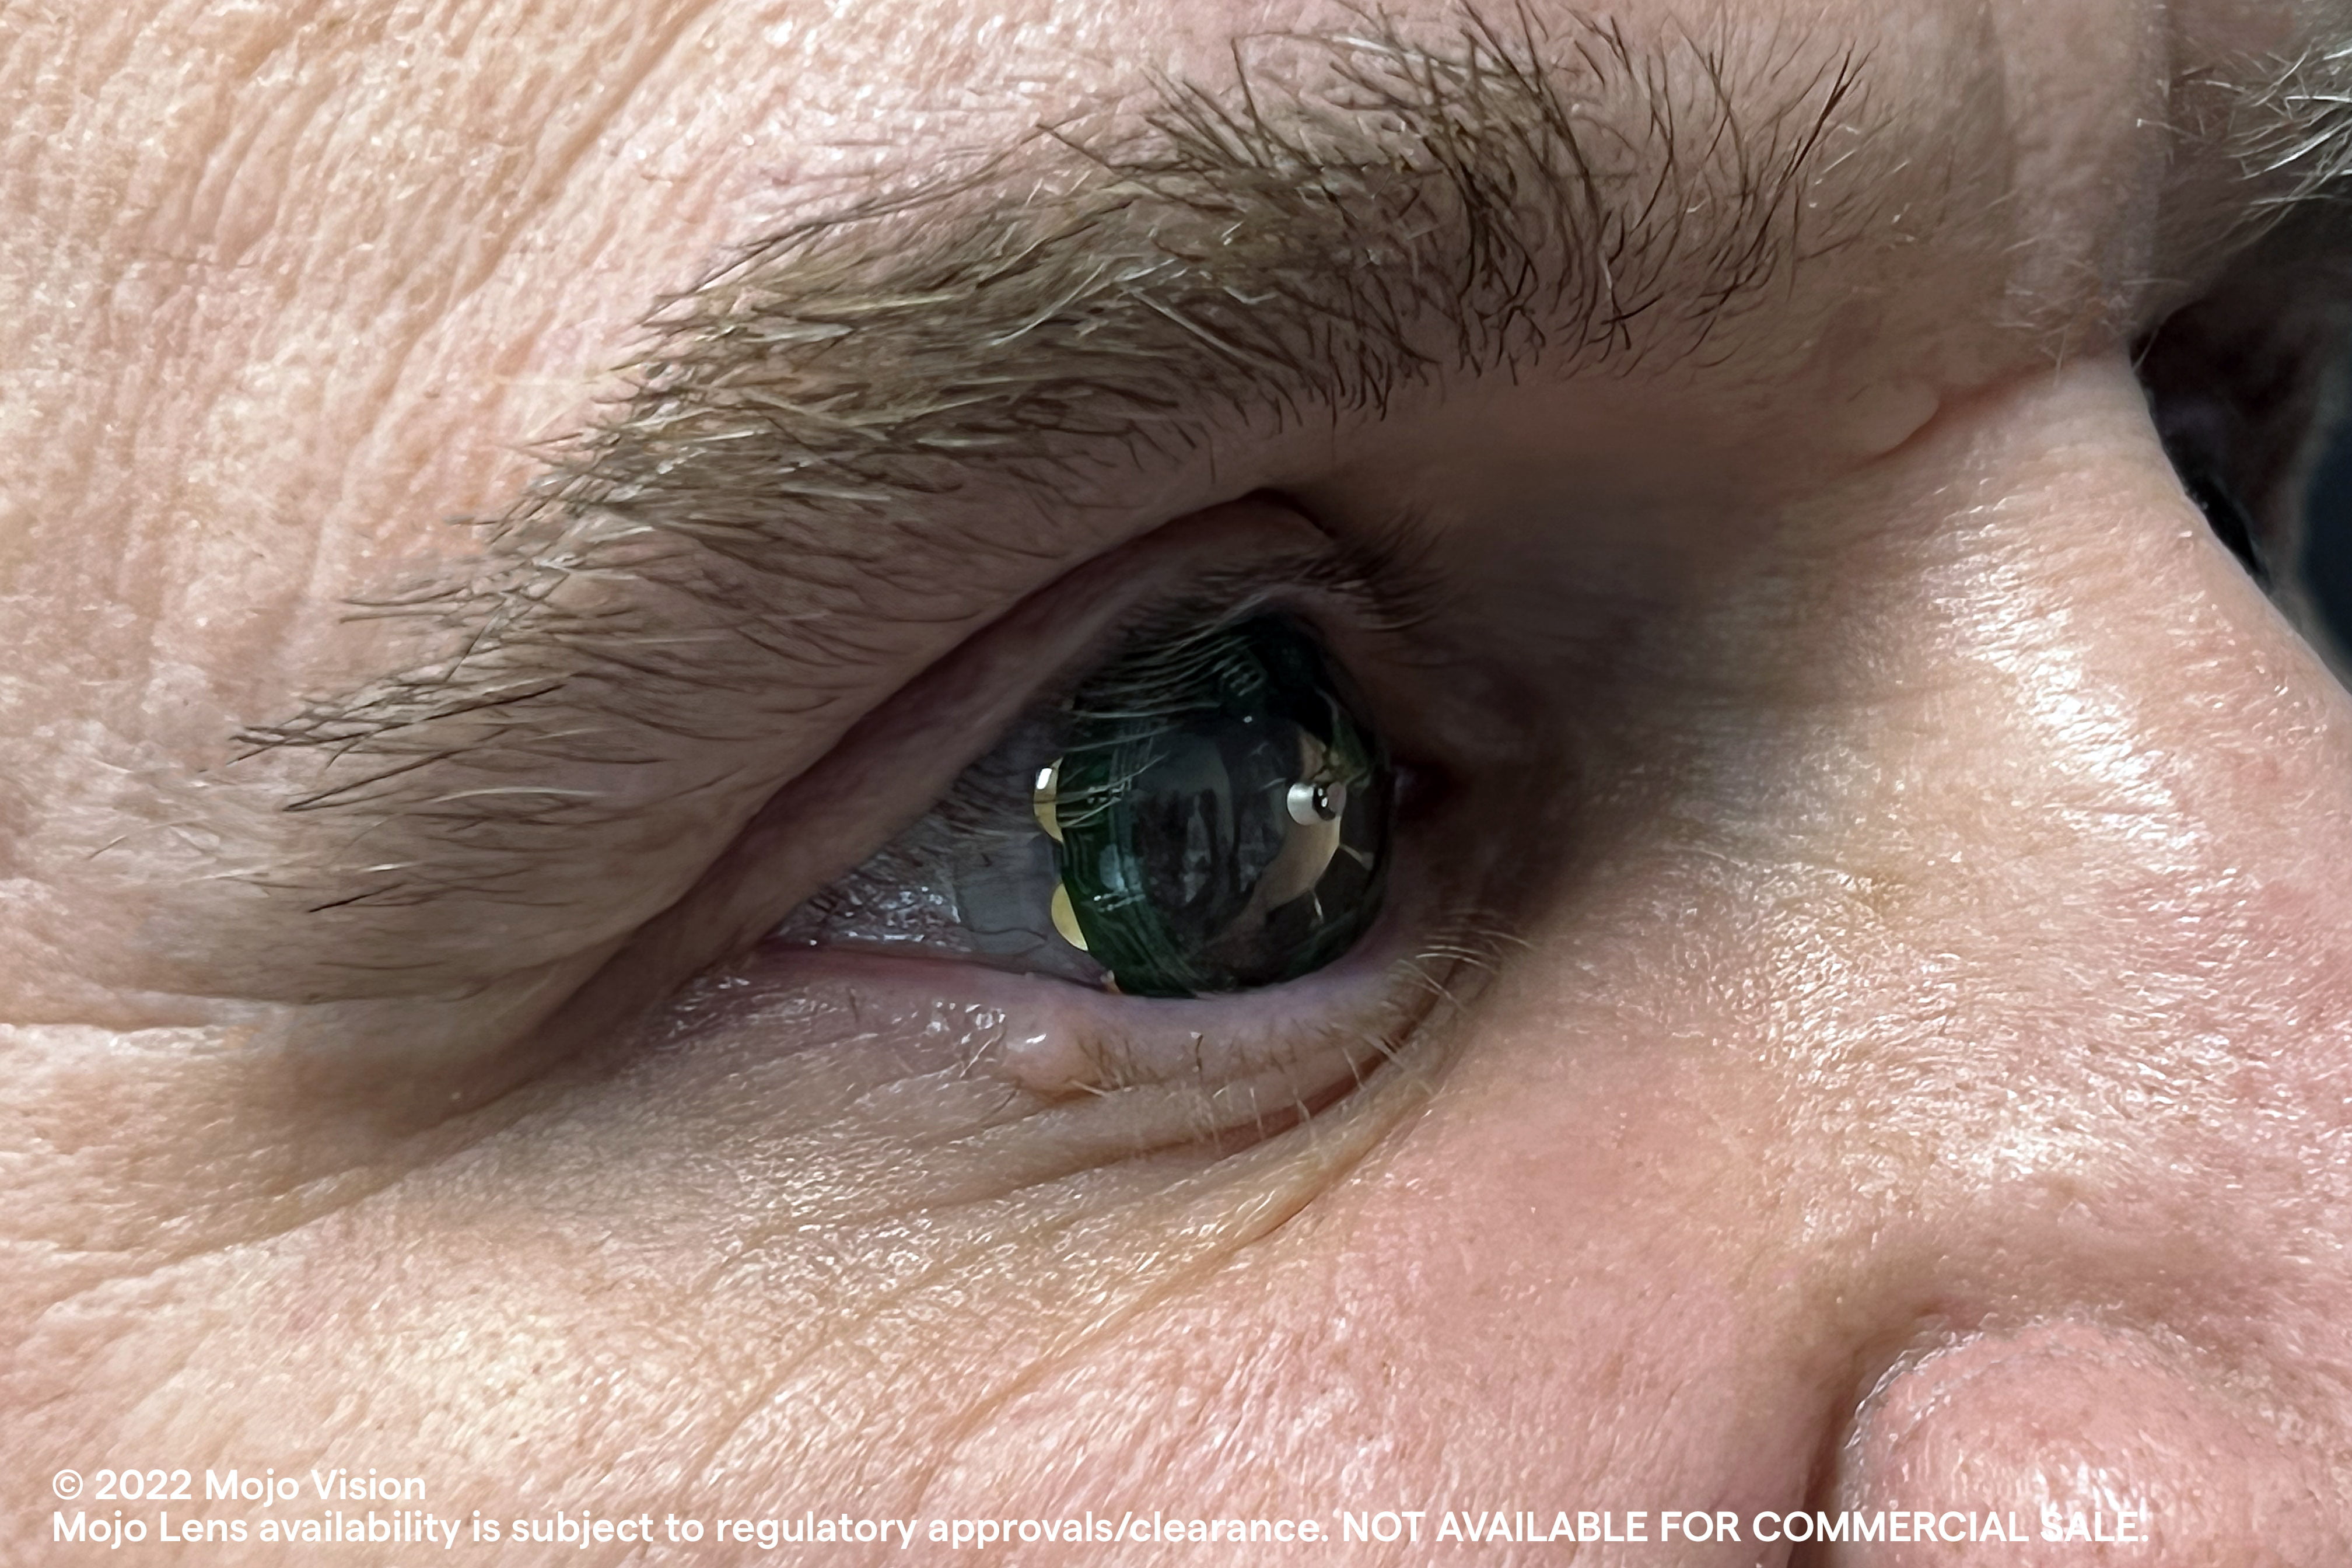 A man wears a Mojo Lens in his eye, you can see his eye in the close-up.